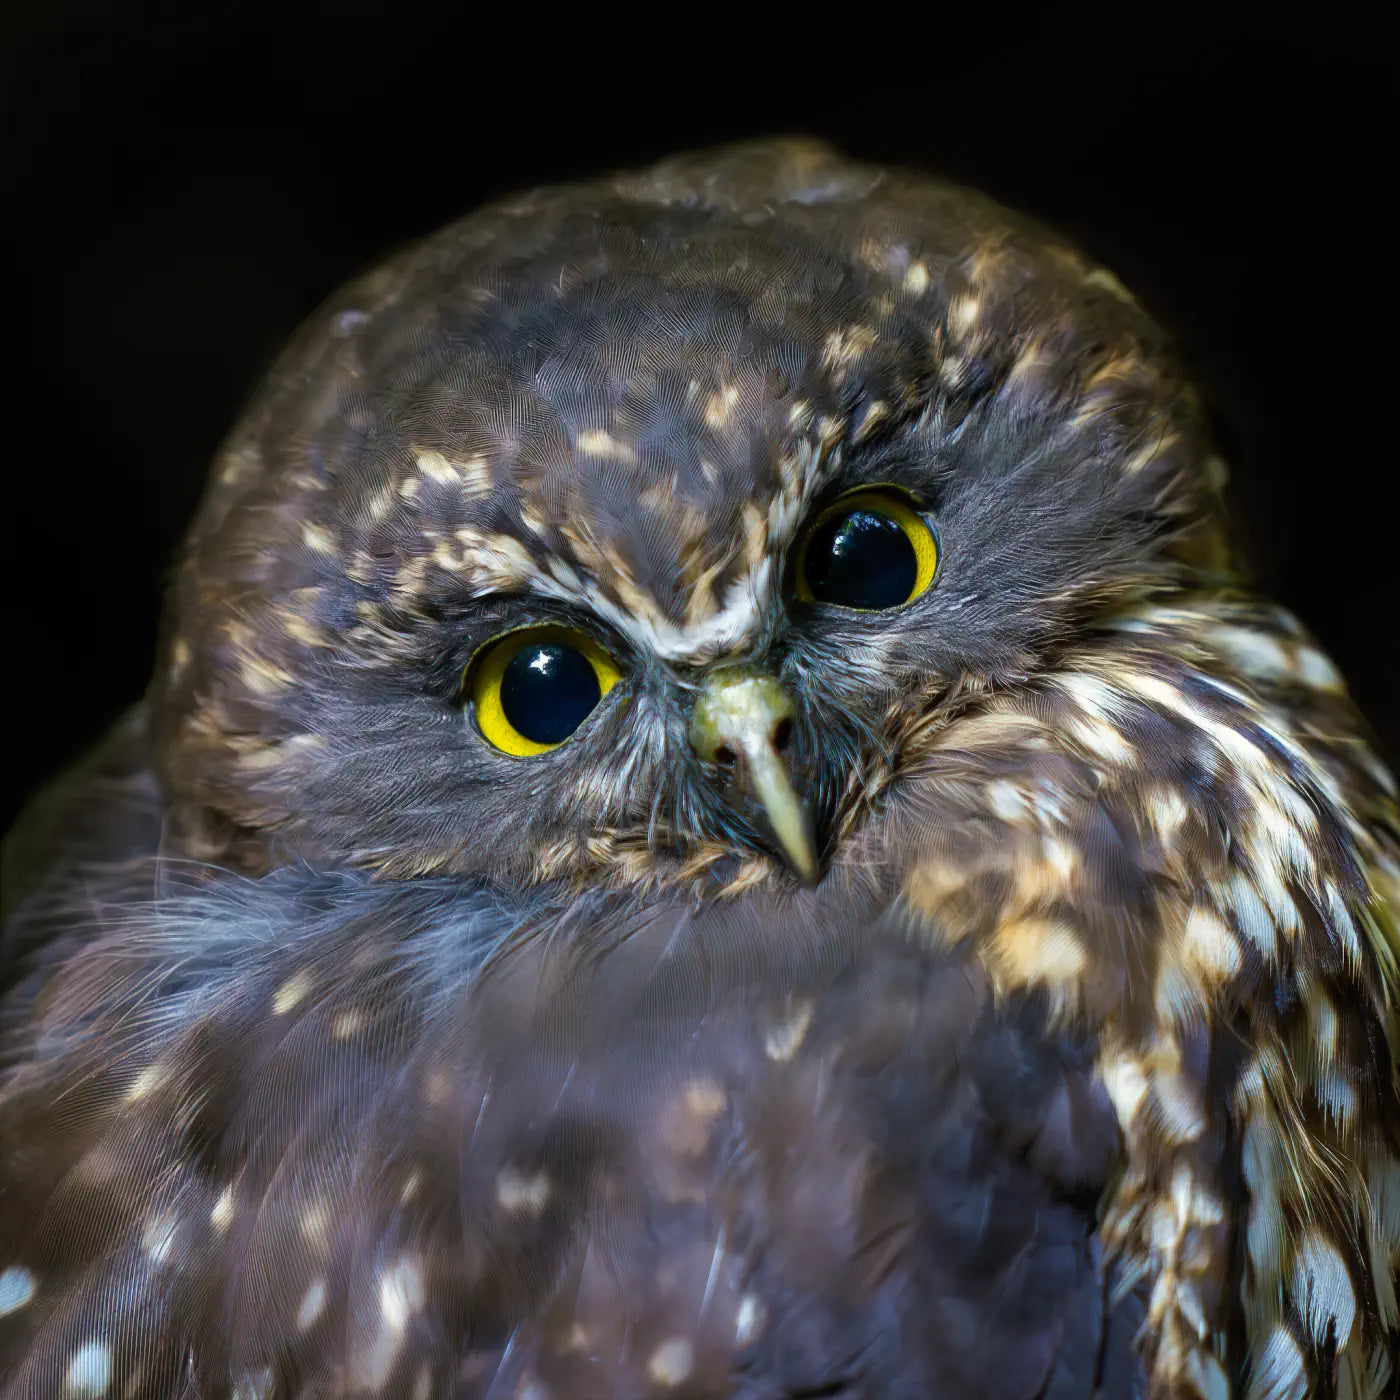 photo of a rurur owl with big yellow eyes